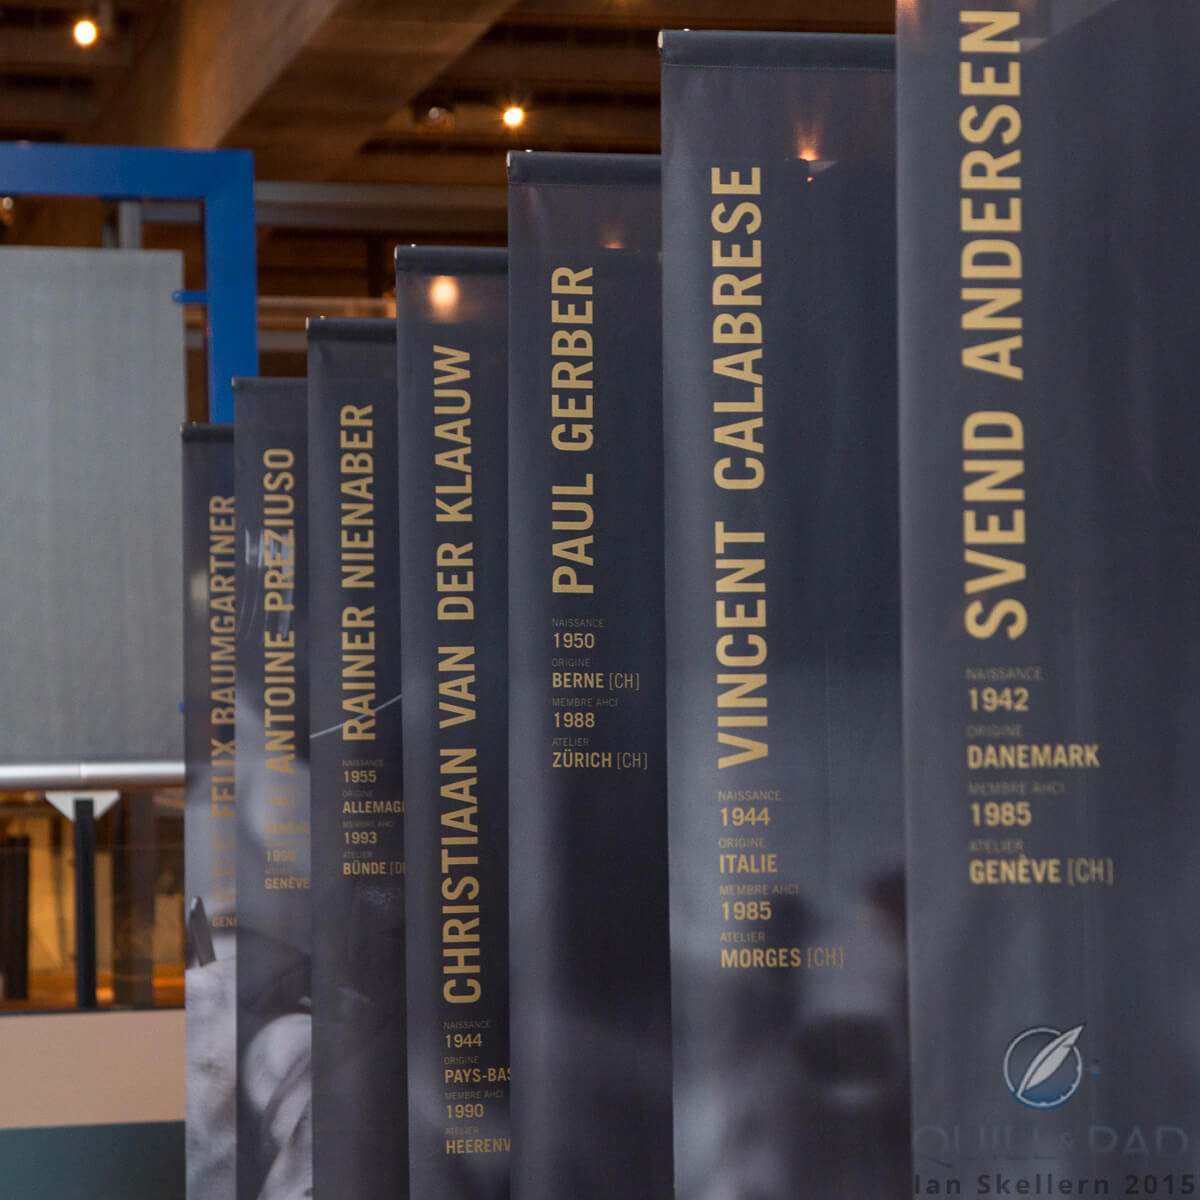 AHCI 30th anniversary exhibition at the MIH museum in La Chaux-de-Fonds in 2015